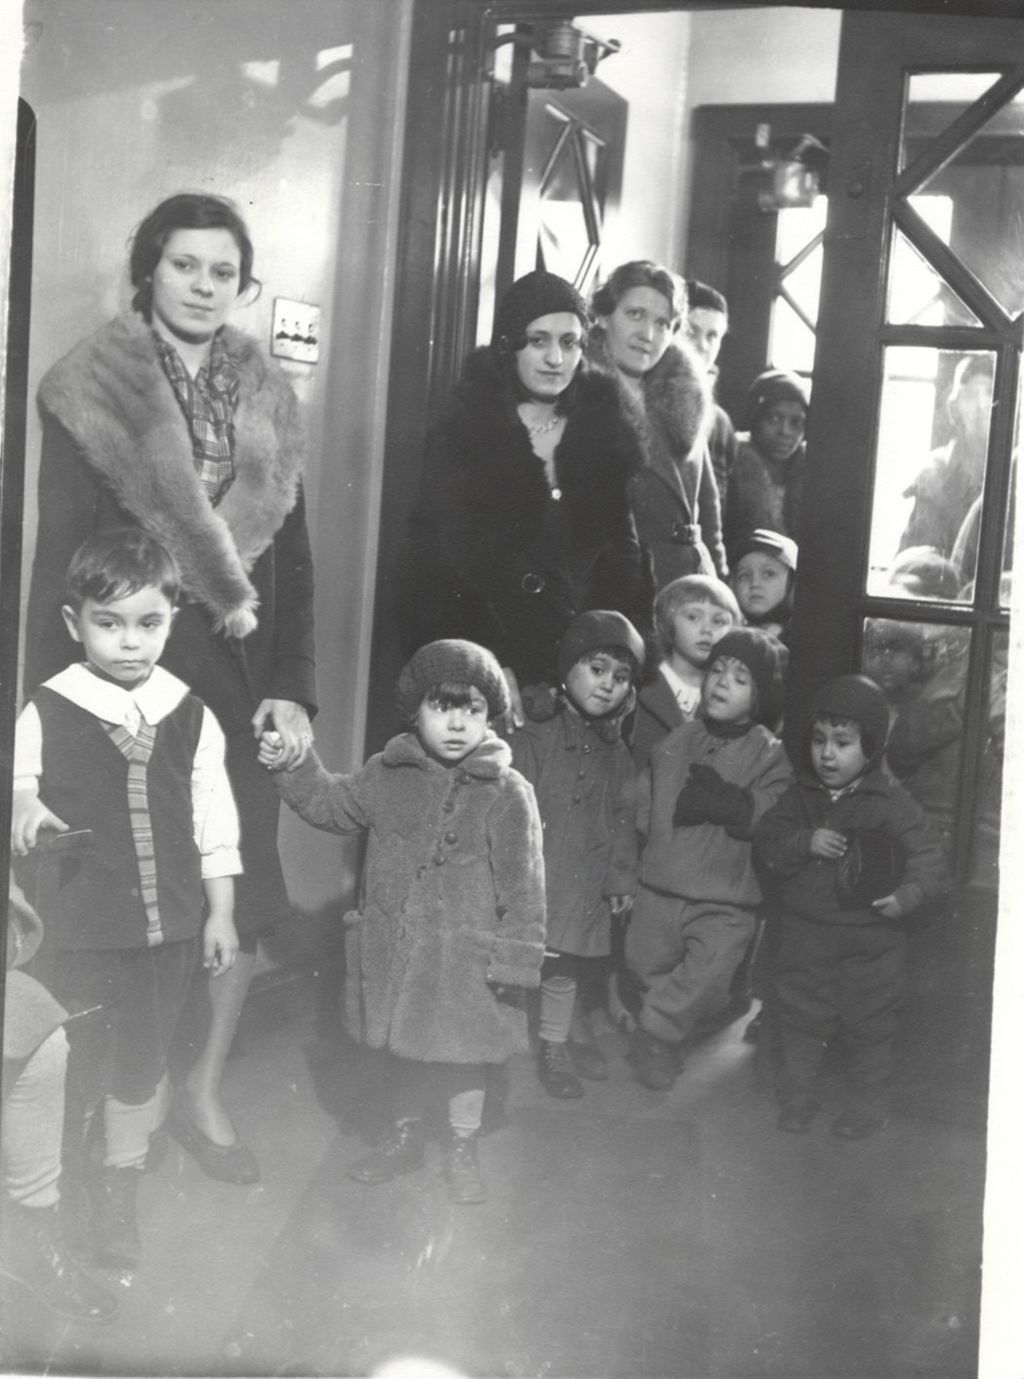 Miniature of Mothers and children wearing coats and waiting in a Hull-House doorway